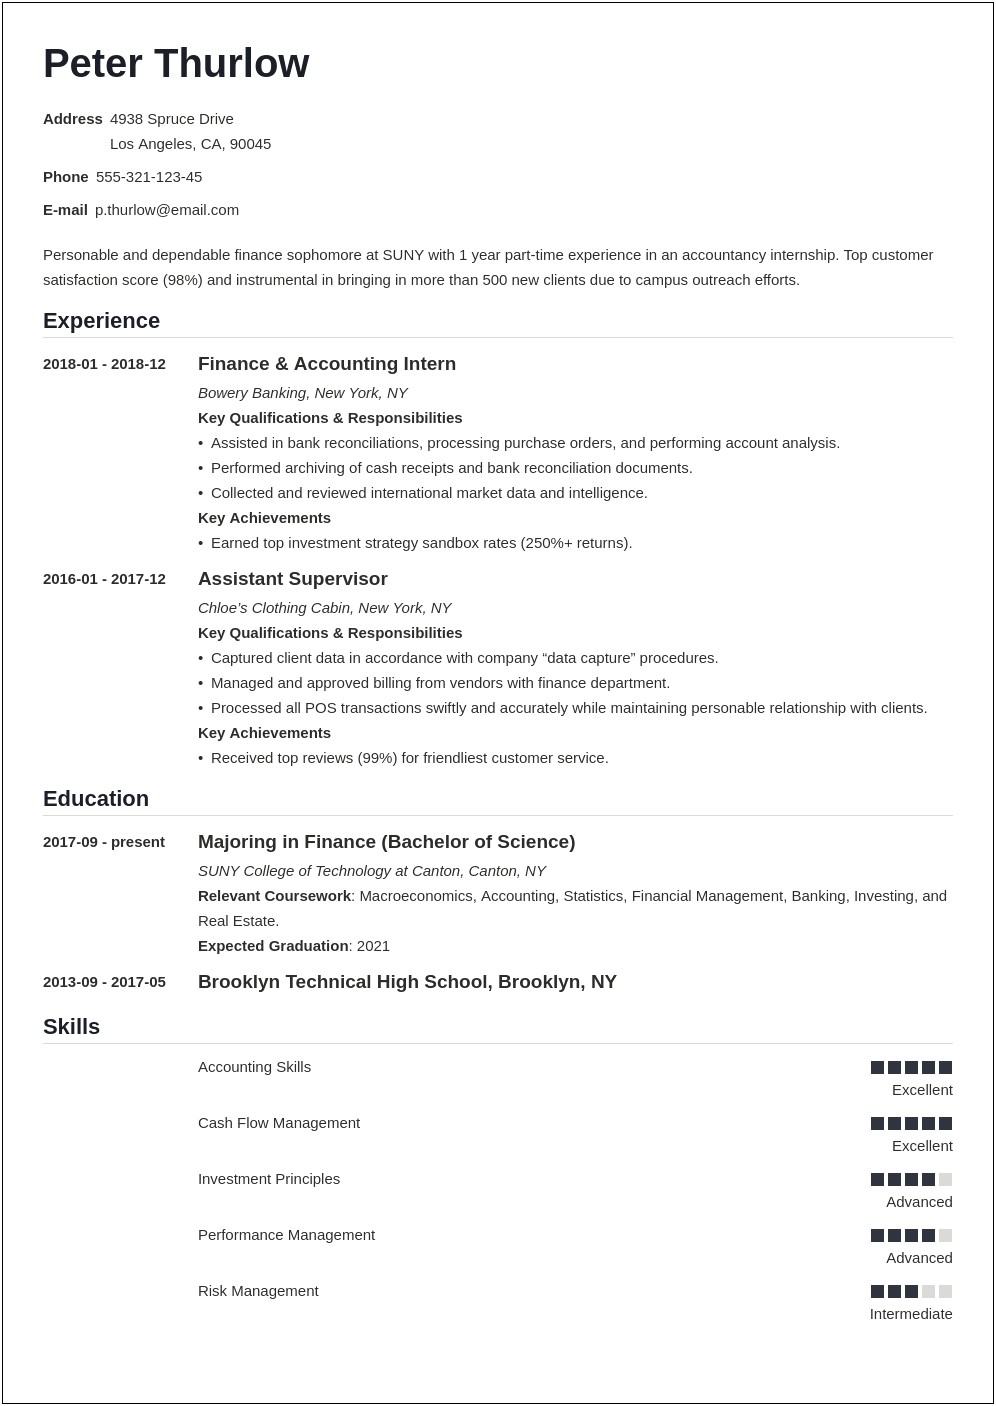 Do You Put Internship Experience On A Resume